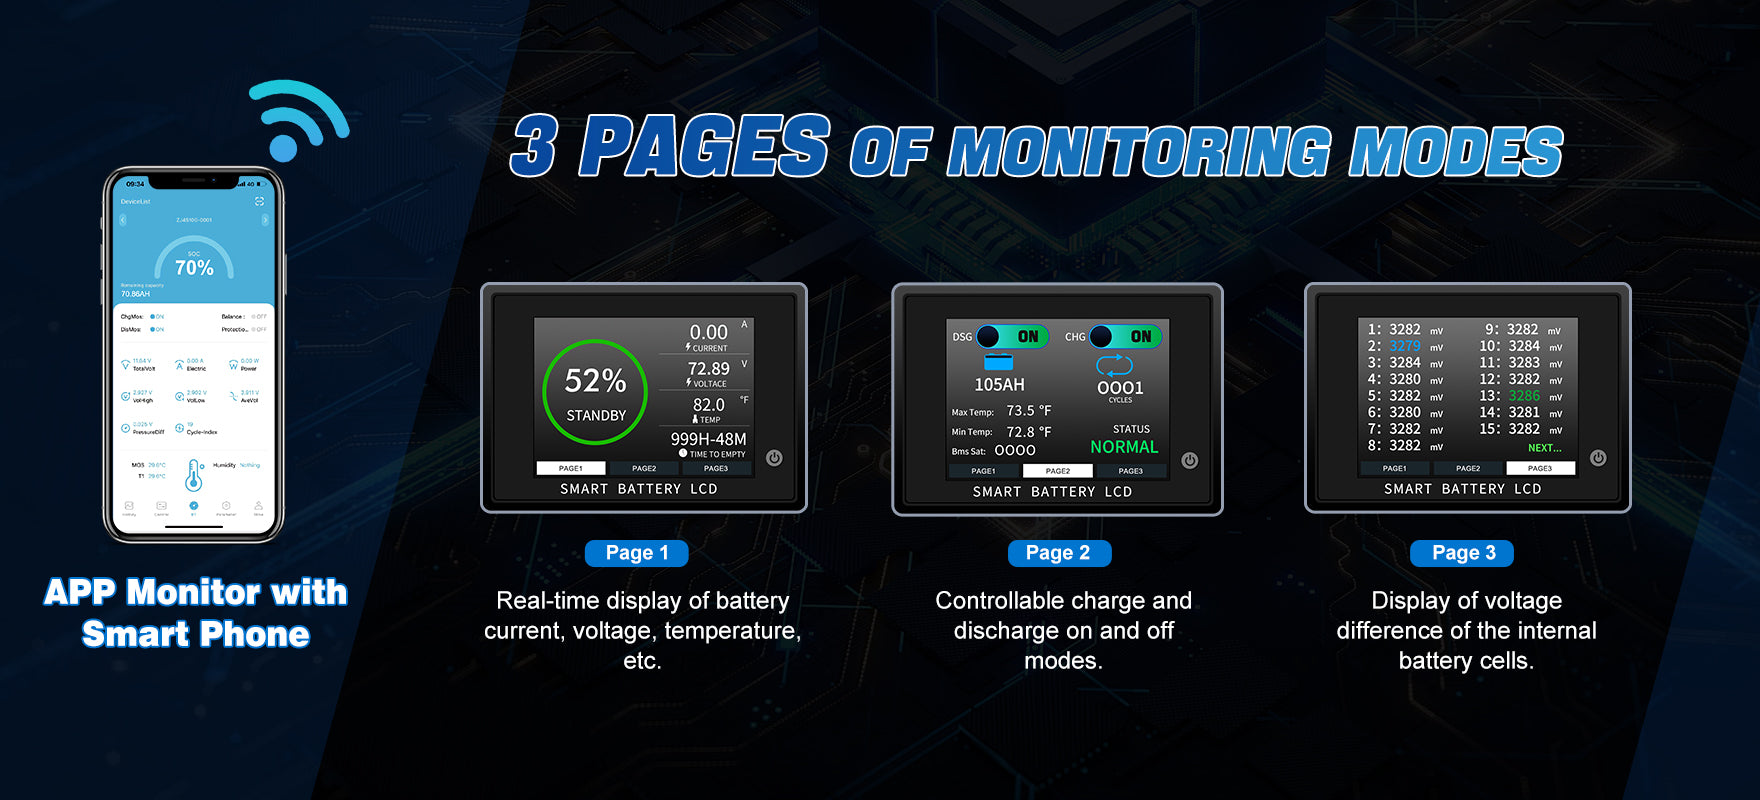 3 Pages of Monitoring Modes